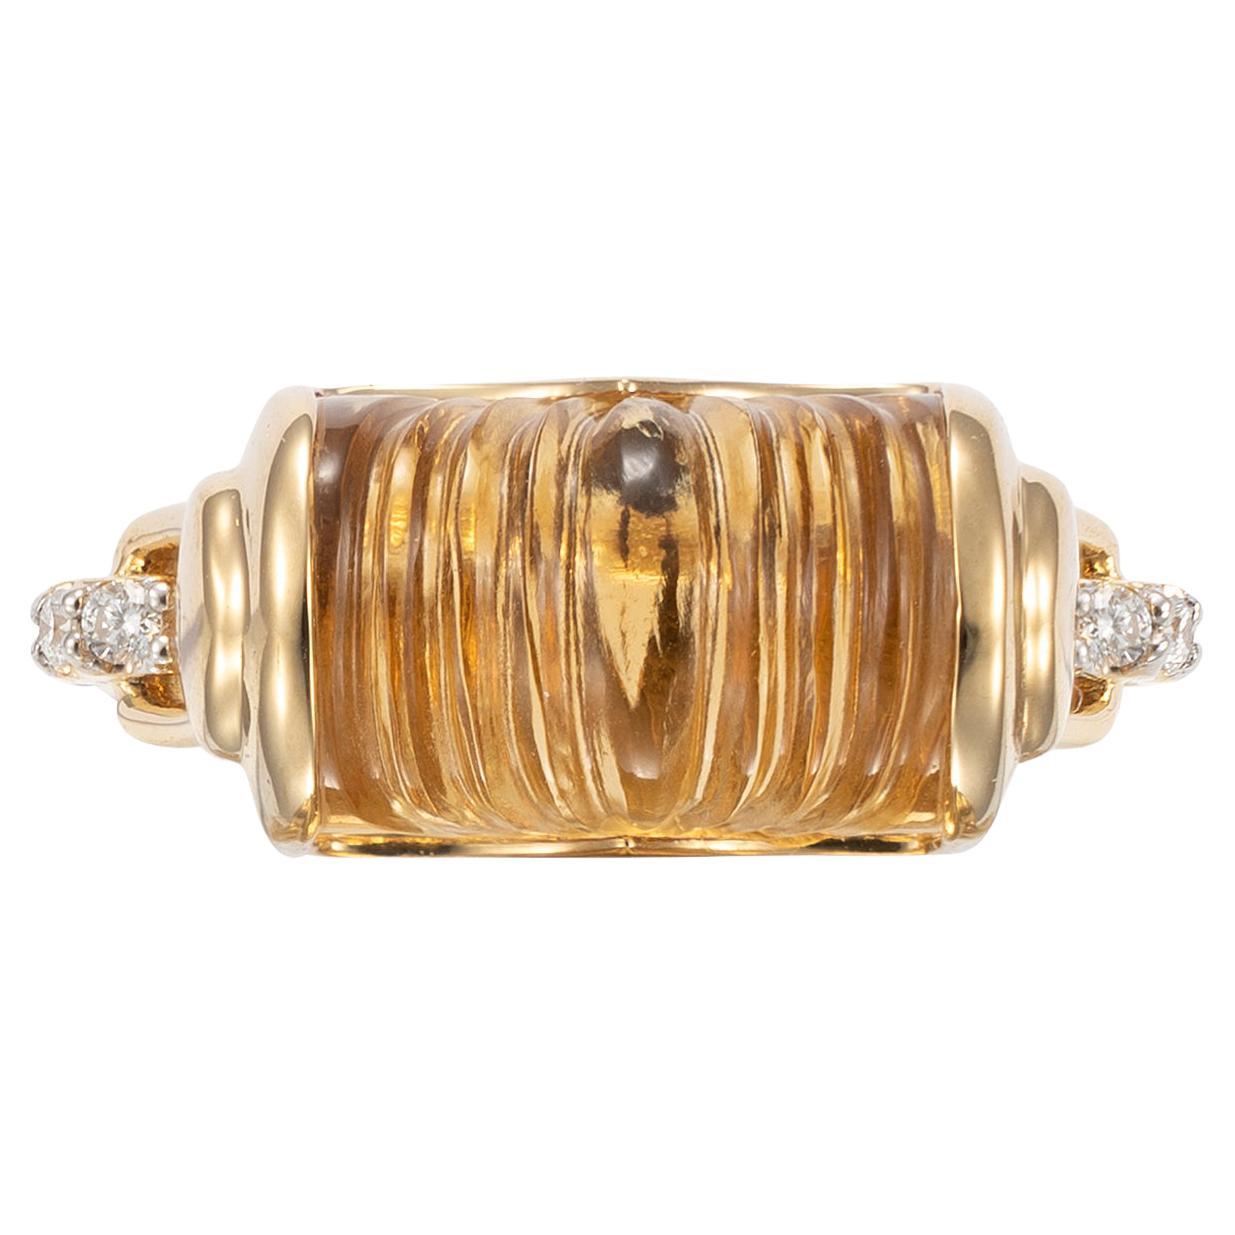 6.7 Carat Carved Citrine Ring with Diamond in 18 Karat Yellow Gold